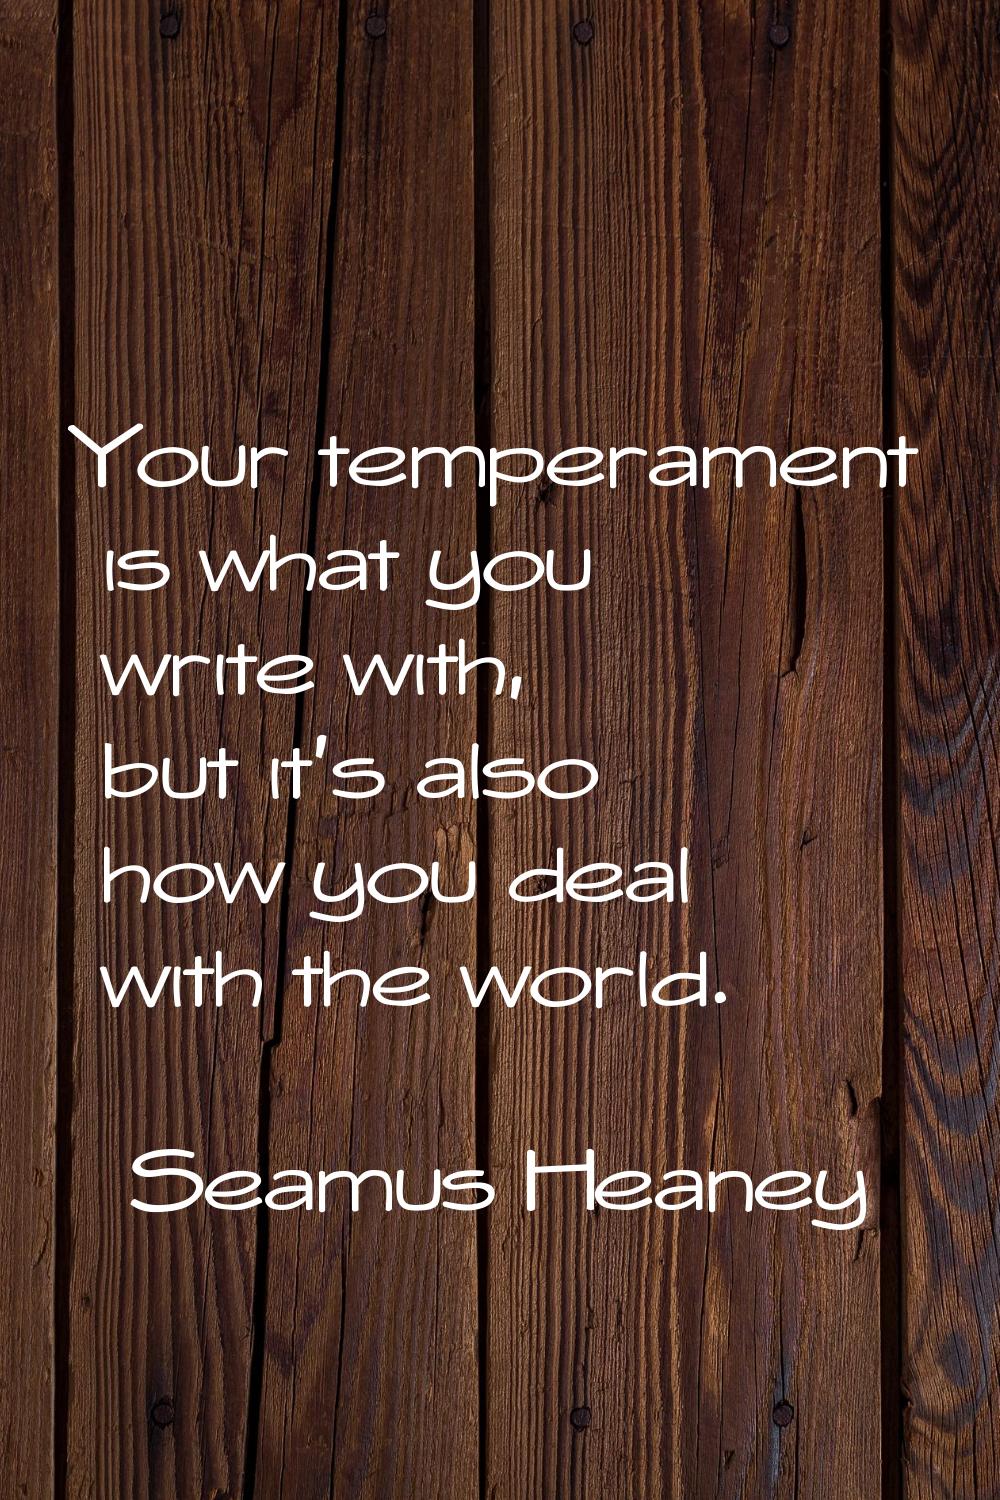 Your temperament is what you write with, but it's also how you deal with the world.